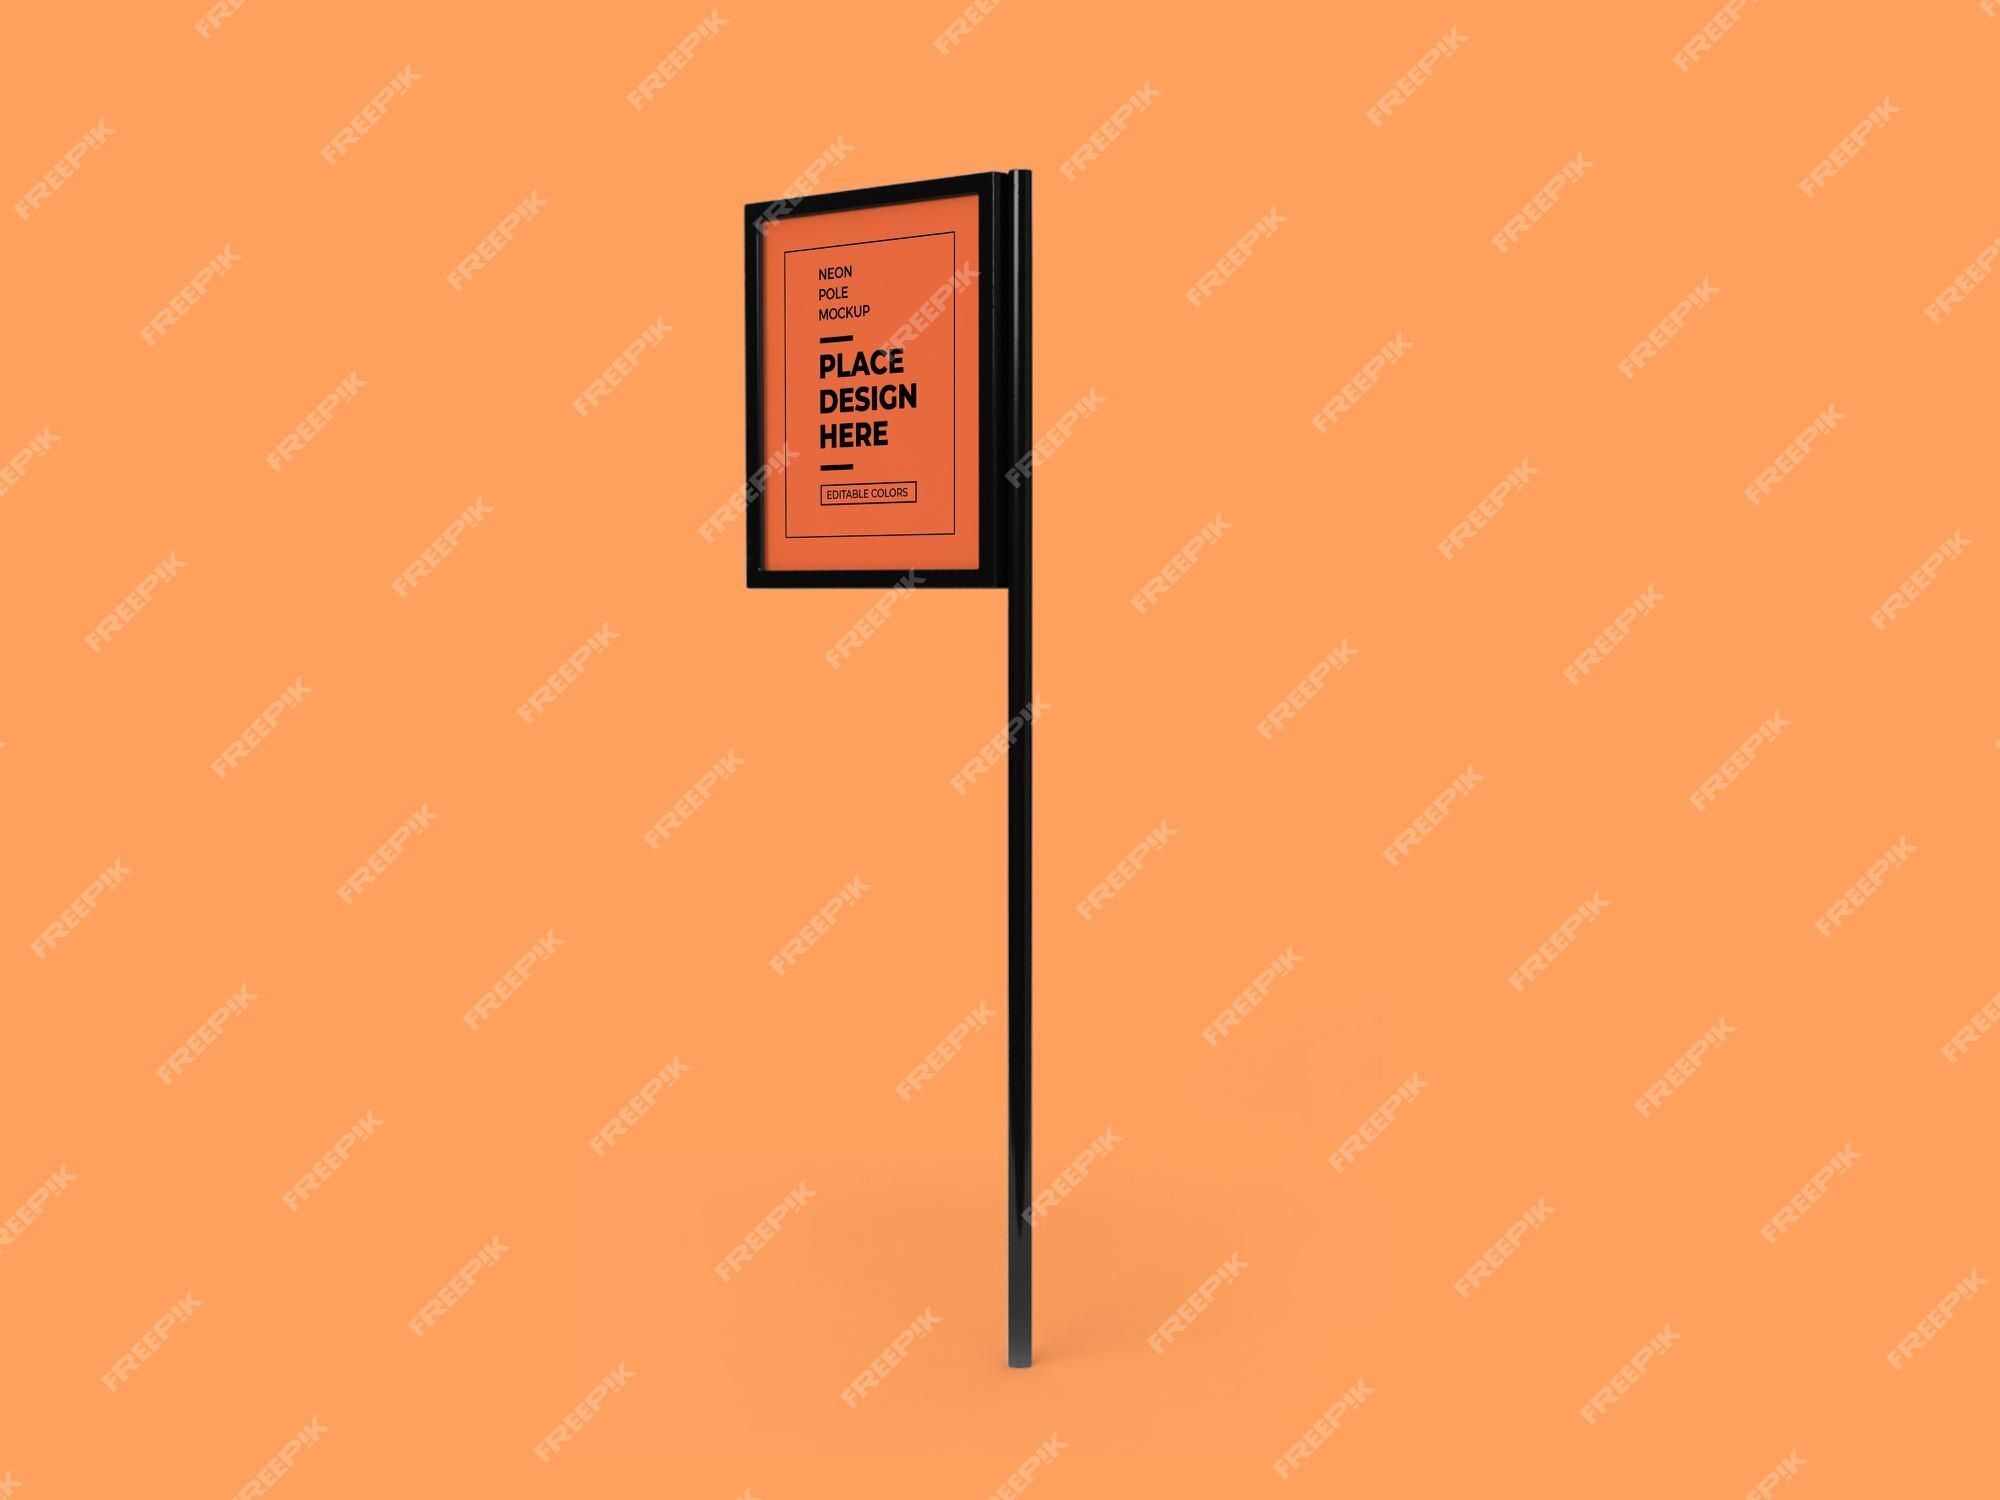 Download this free standing sign mockup to showcase your signage designs. - Neon orange